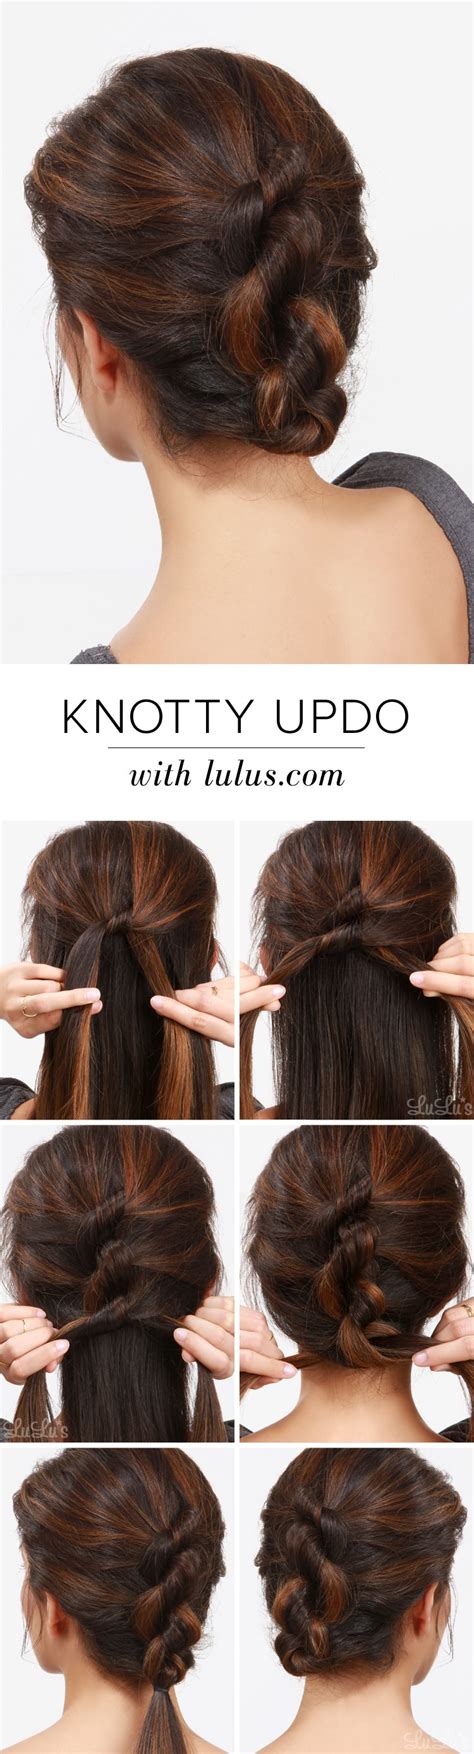 Without further ado, here are 60 easy casual updos/hairdos for women with long beautiful hair 20 Easy Hairstyle Tutorials for Your Everyday Look ...